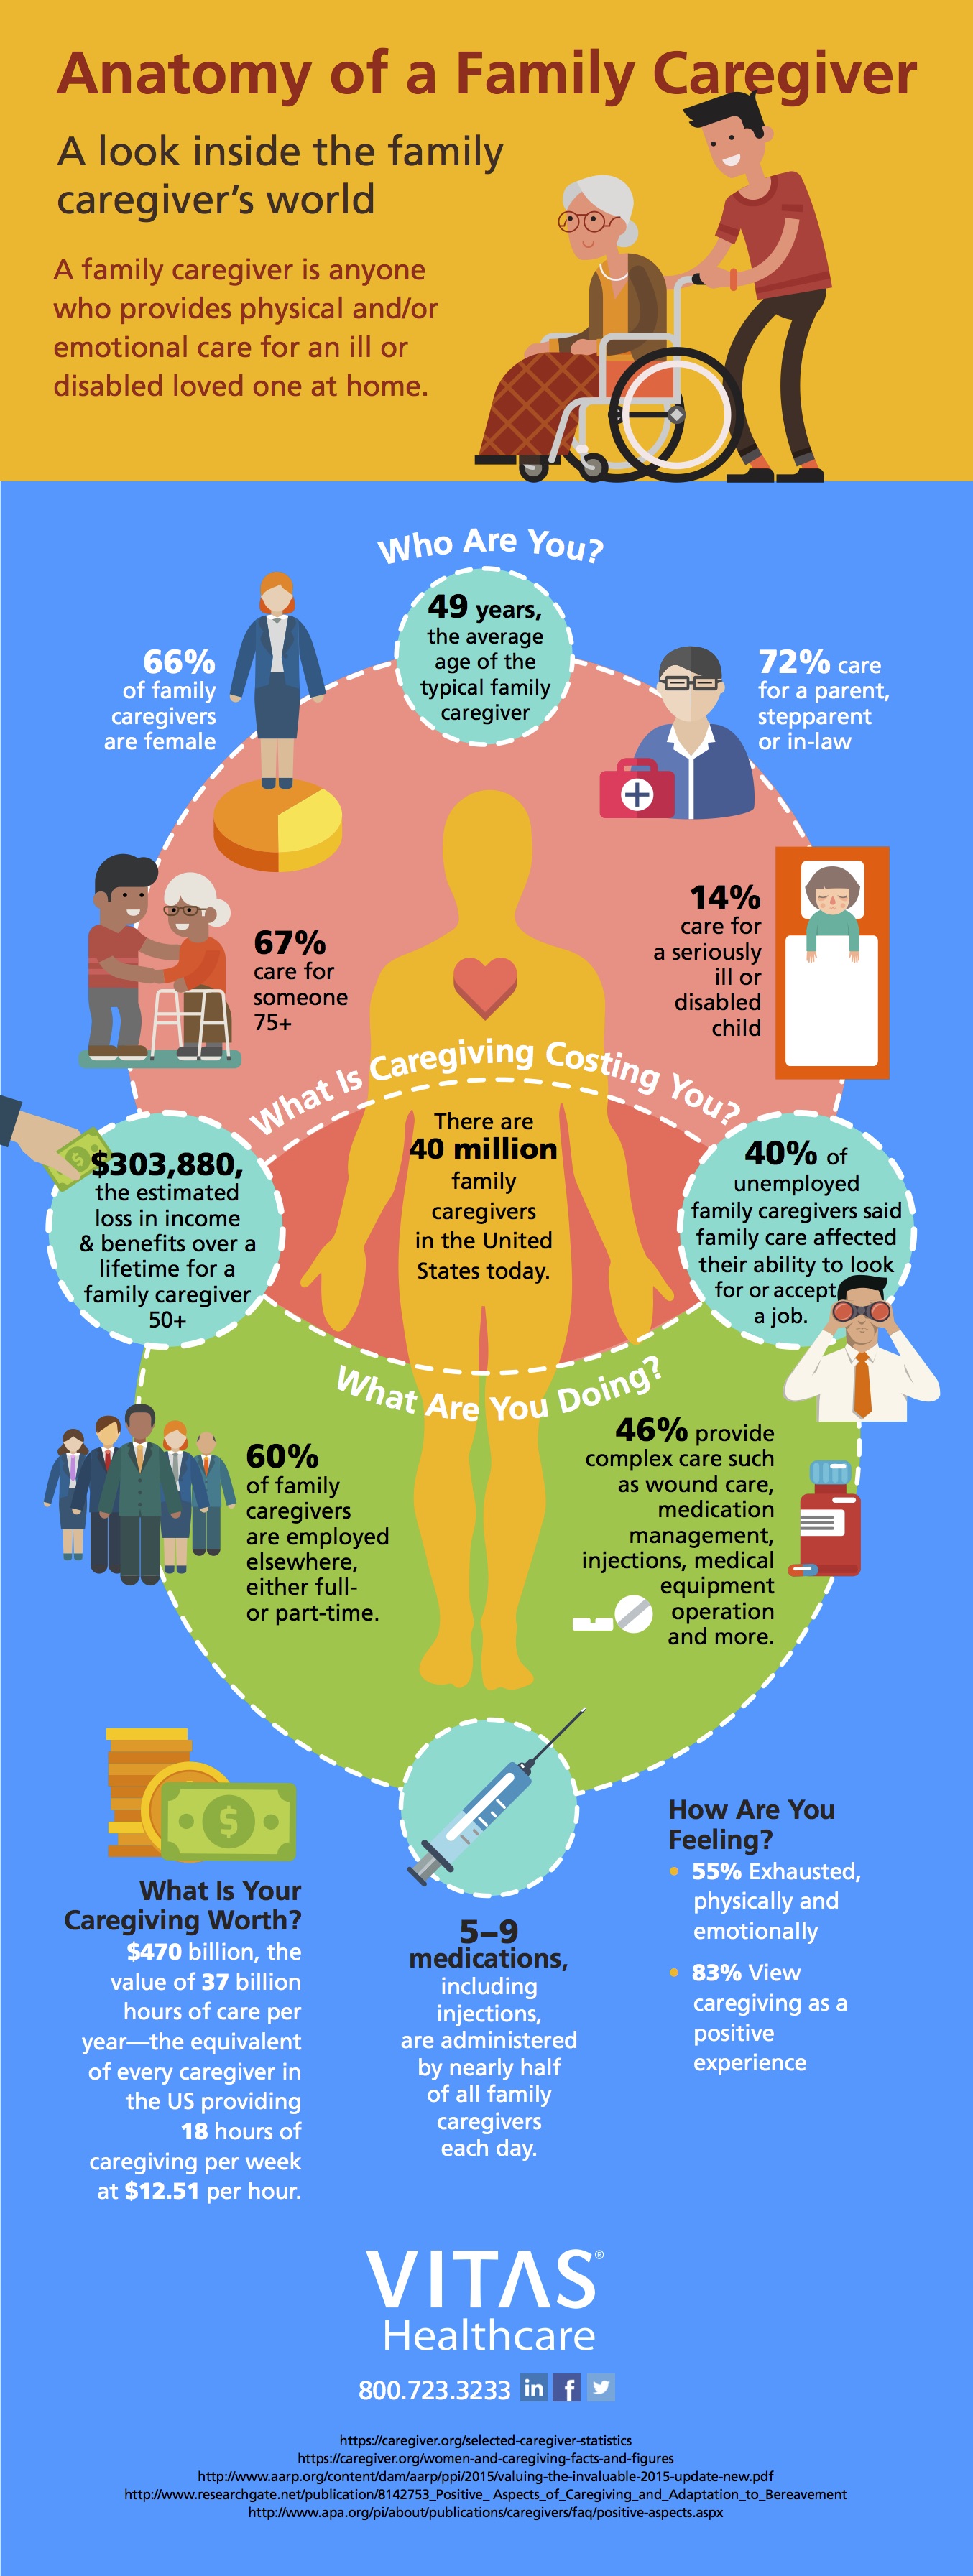 Caregiver Facts and Figures